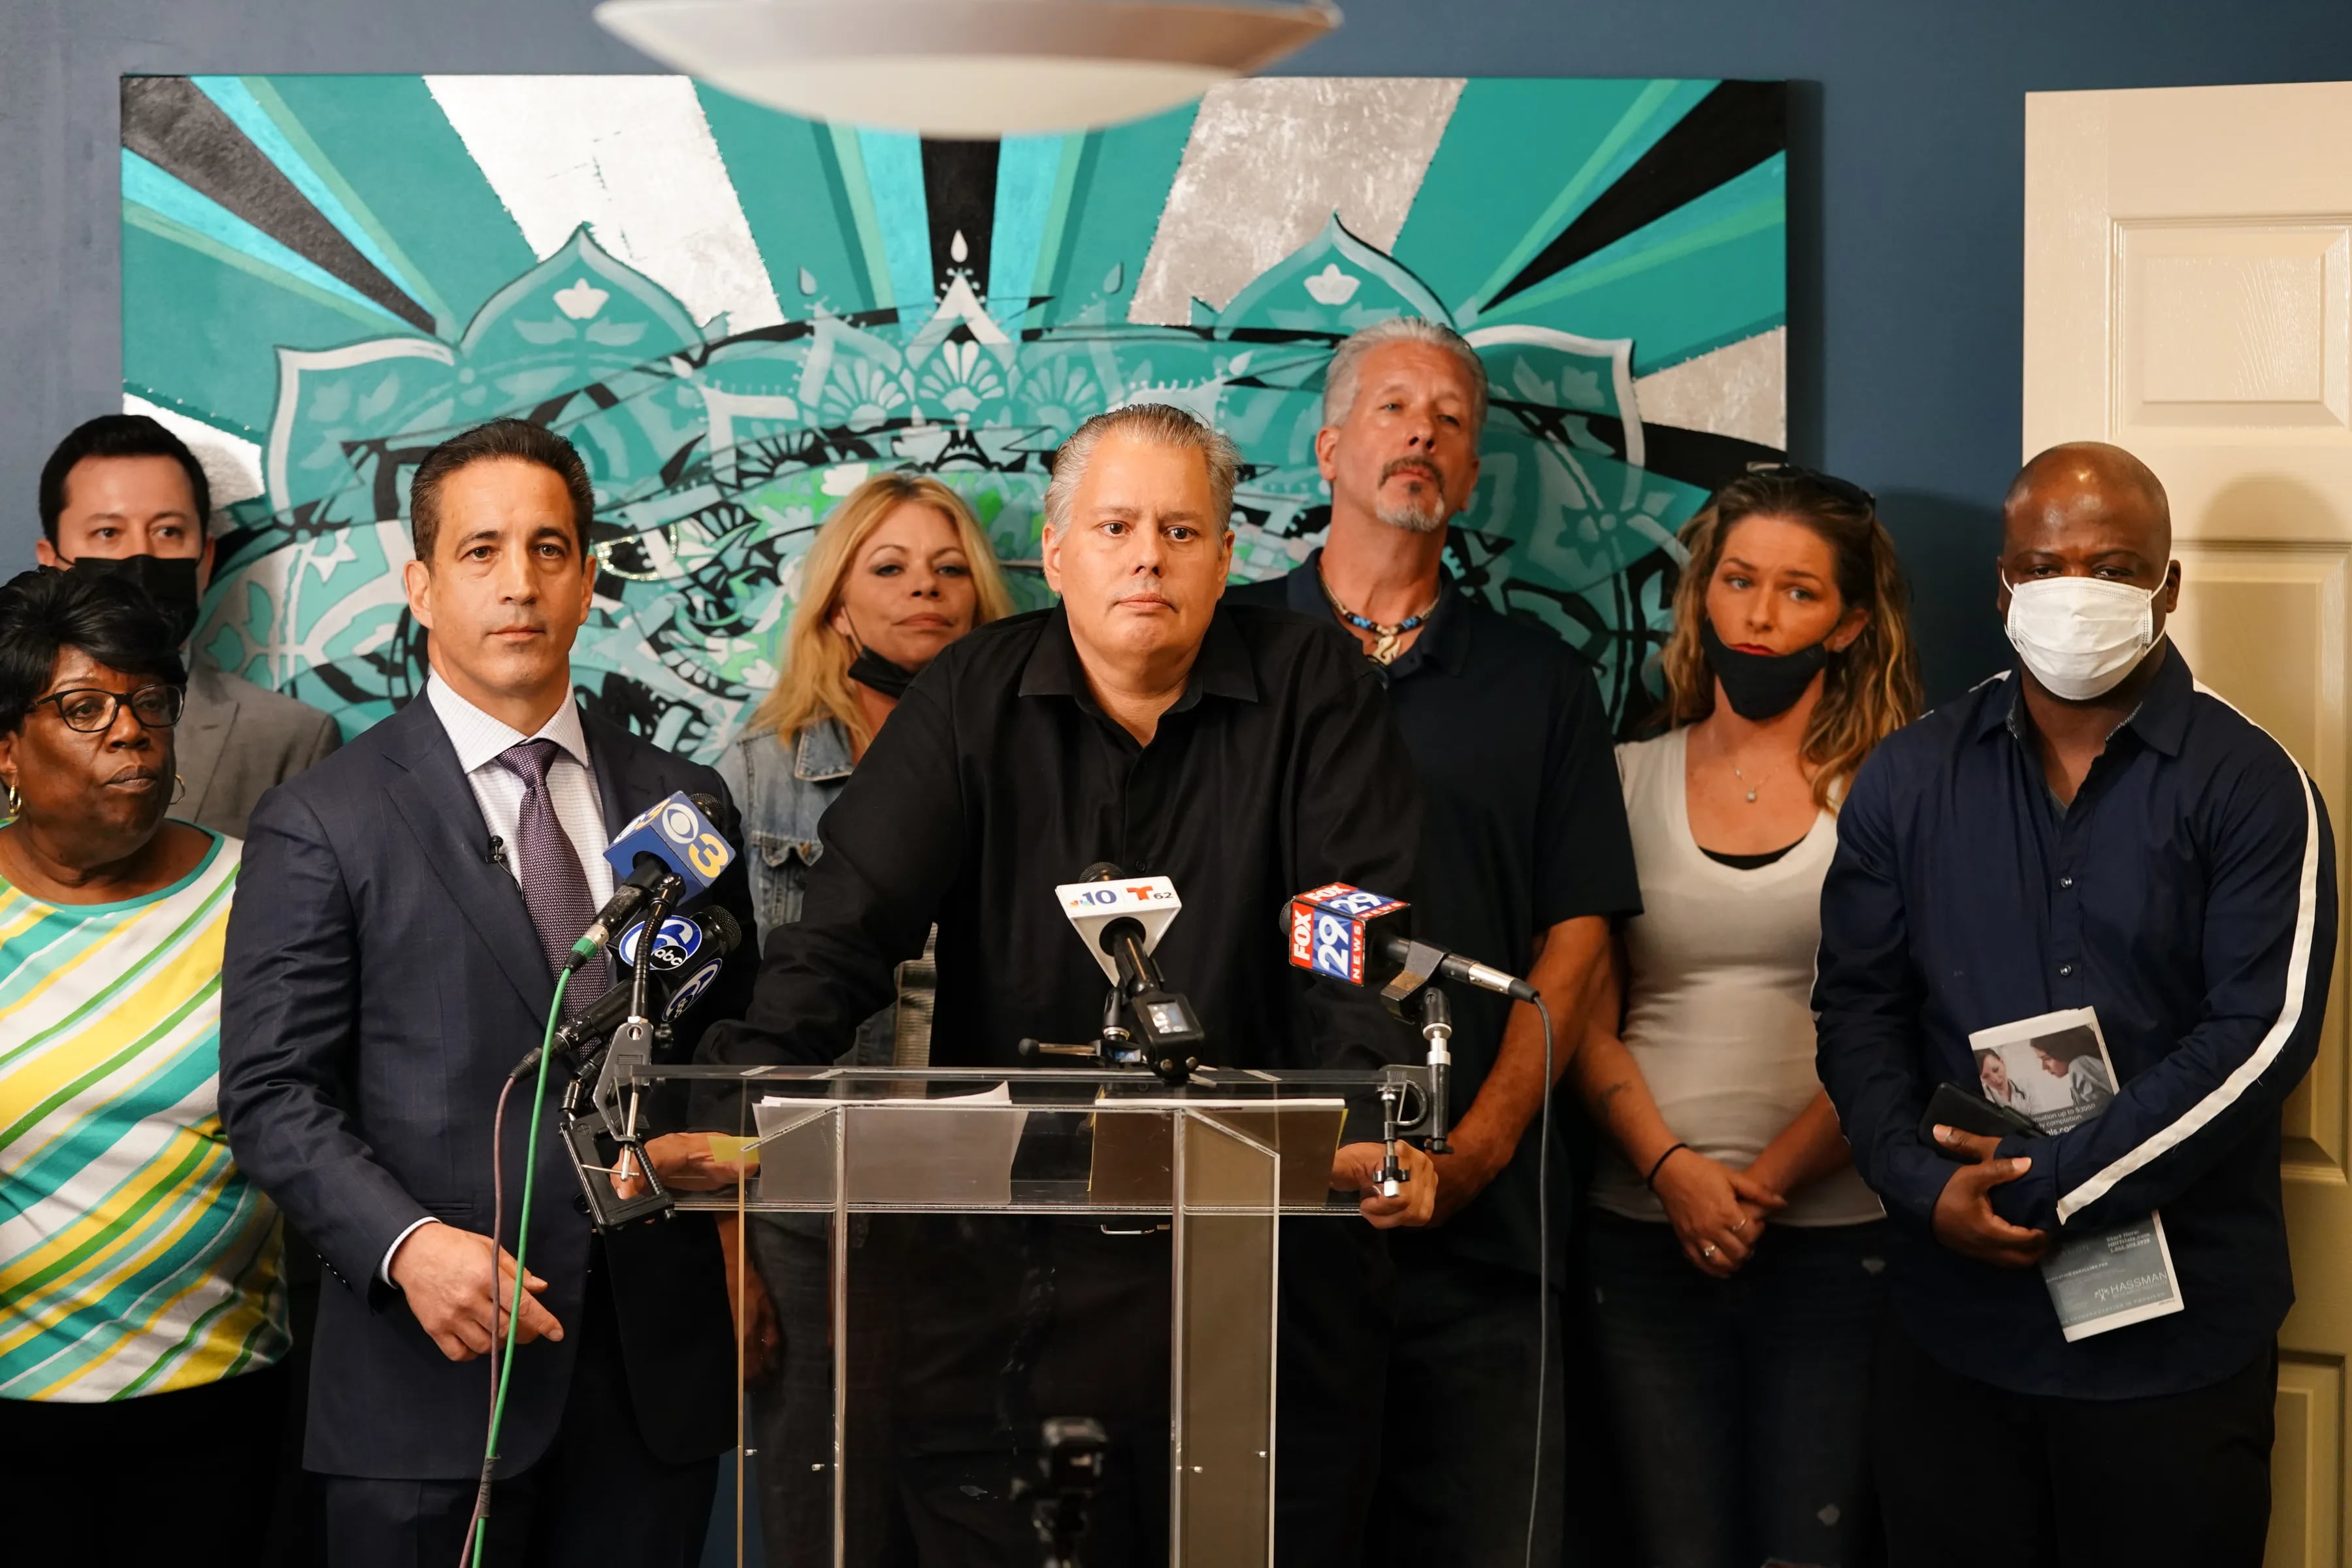 Walter Ogrod (center) speaks surrounded by his lawyer Joseph Marrone (left) and supporters during a news conference to announce a civil lawsuit against the City of Philadelphia.